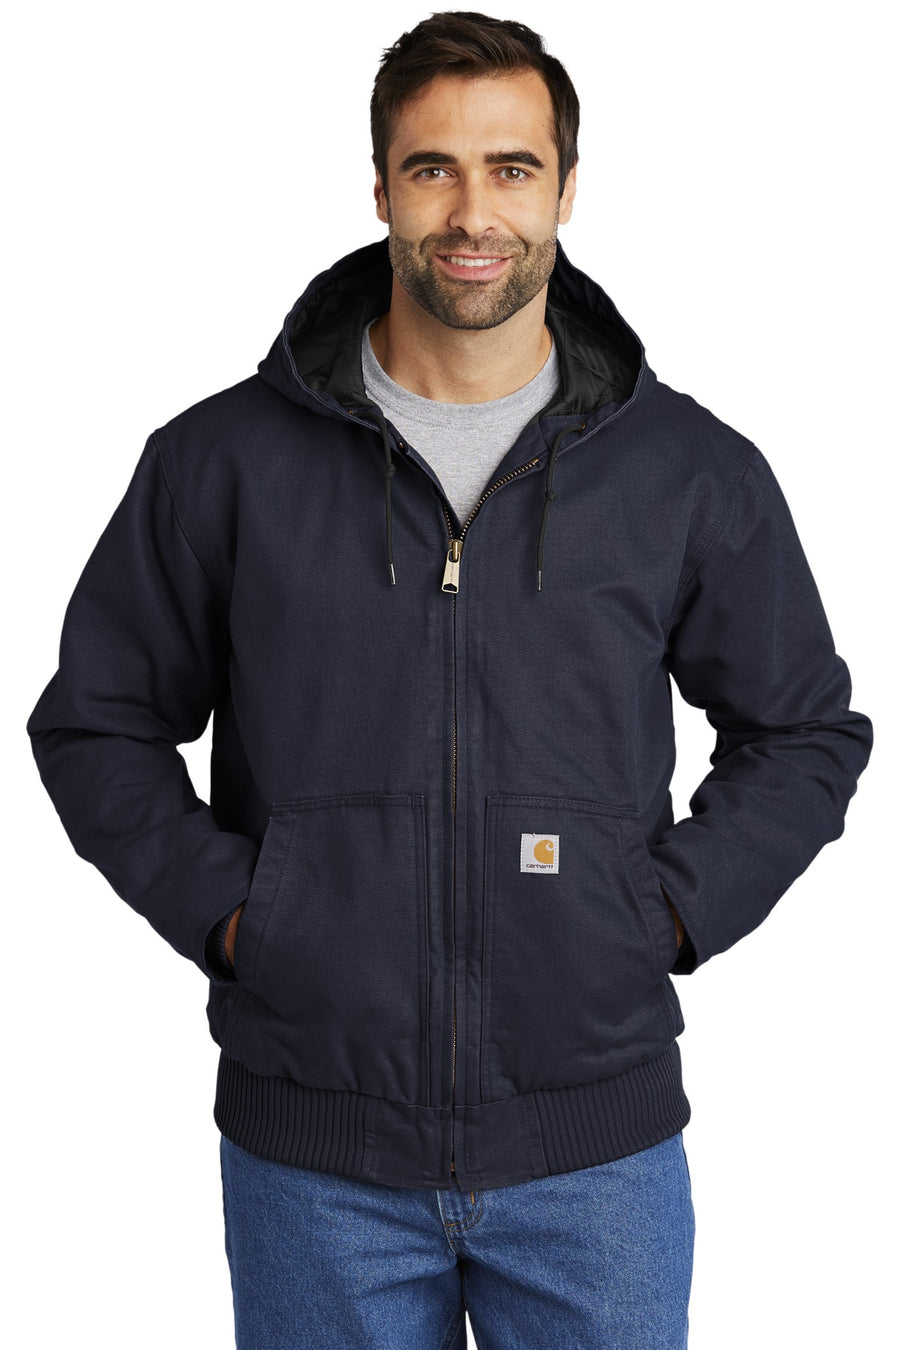 Carhartt Tall Washed Duck Active Jac.